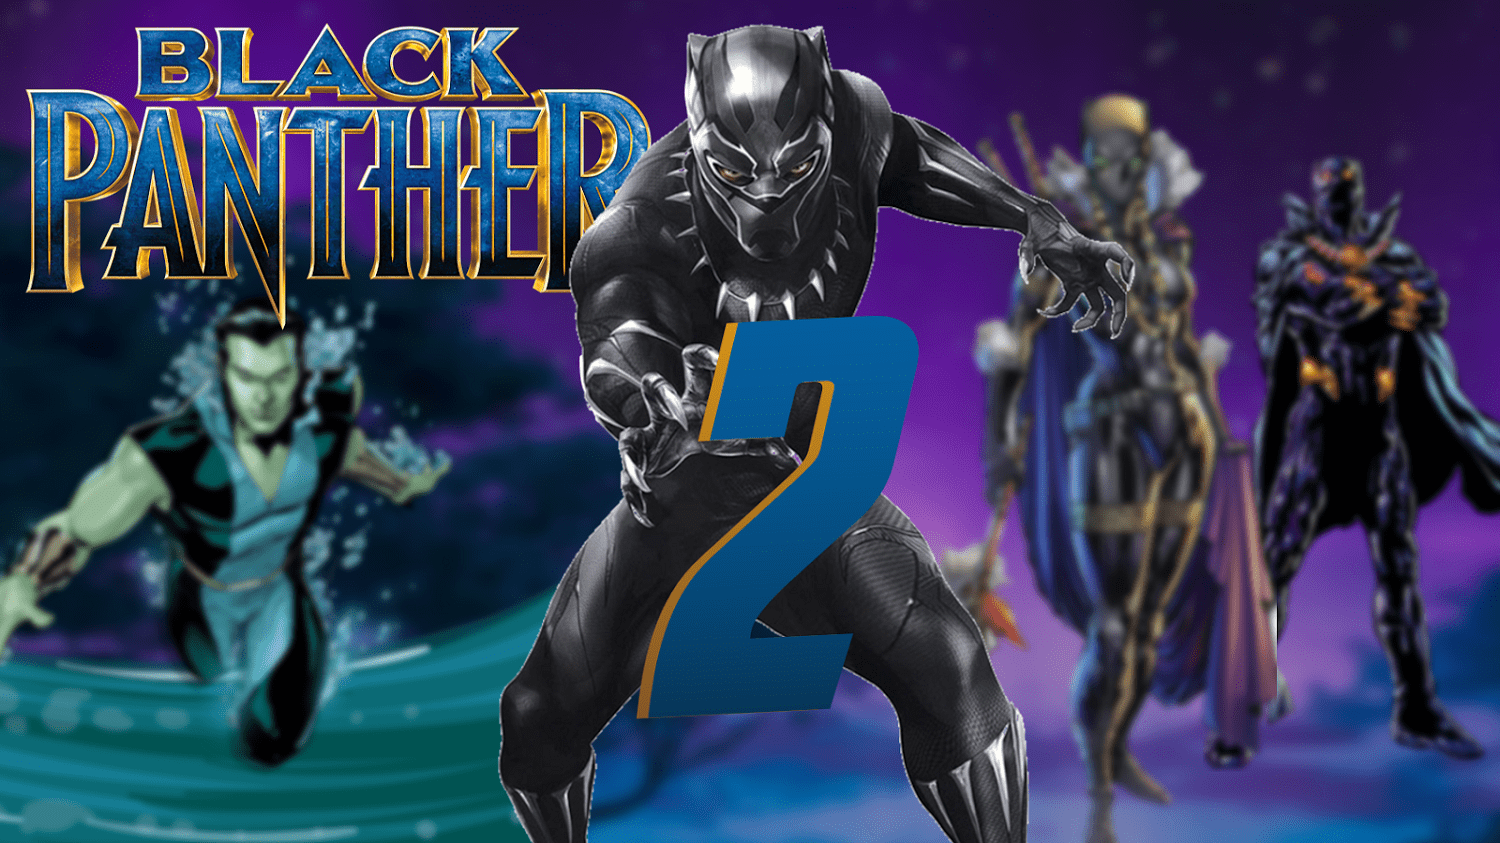 Black Panther 2: Release date, Cast, Plot And What Can The Fans Expect